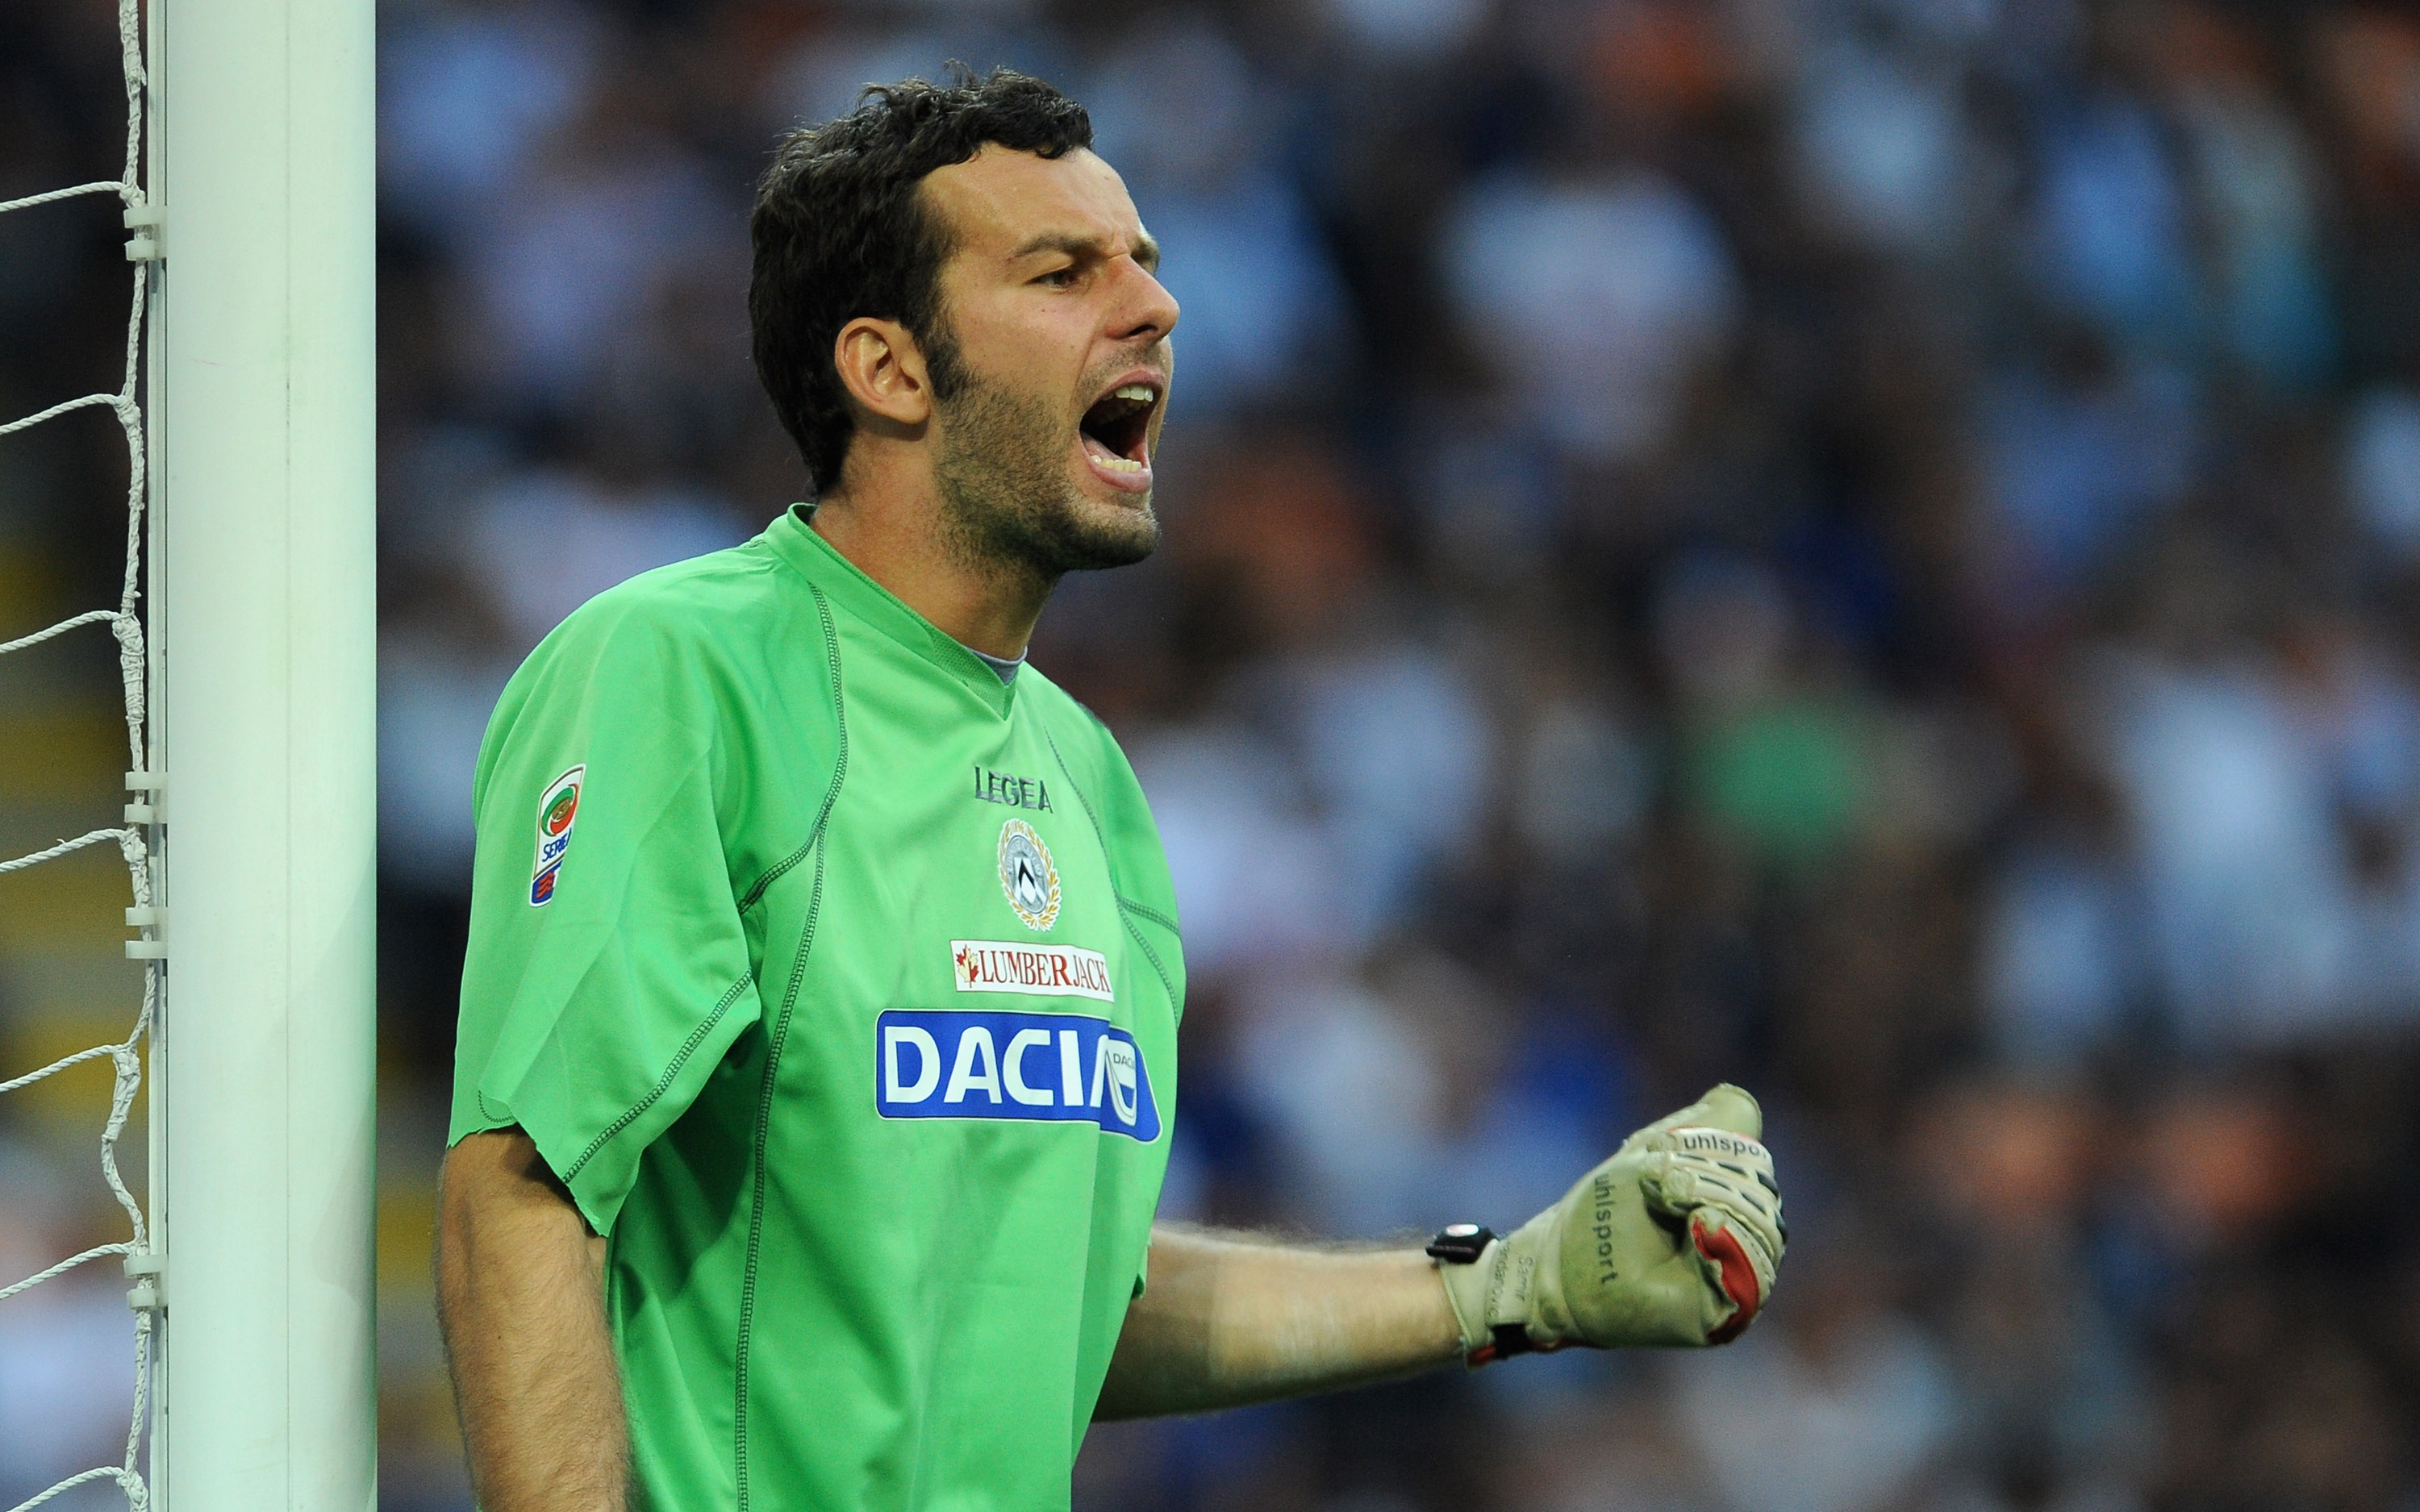 MILAN, ITALY - SEPTEMBER 11:  Samir Handanovic  of Udinese Calcio issues instructions during the Serie A match between FC Internazionale and Udinese Calcio at Stadio Giuseppe Meazza on September 11, 2010 in Milan, Italy.  (Photo by Valerio Pennicino/Getty